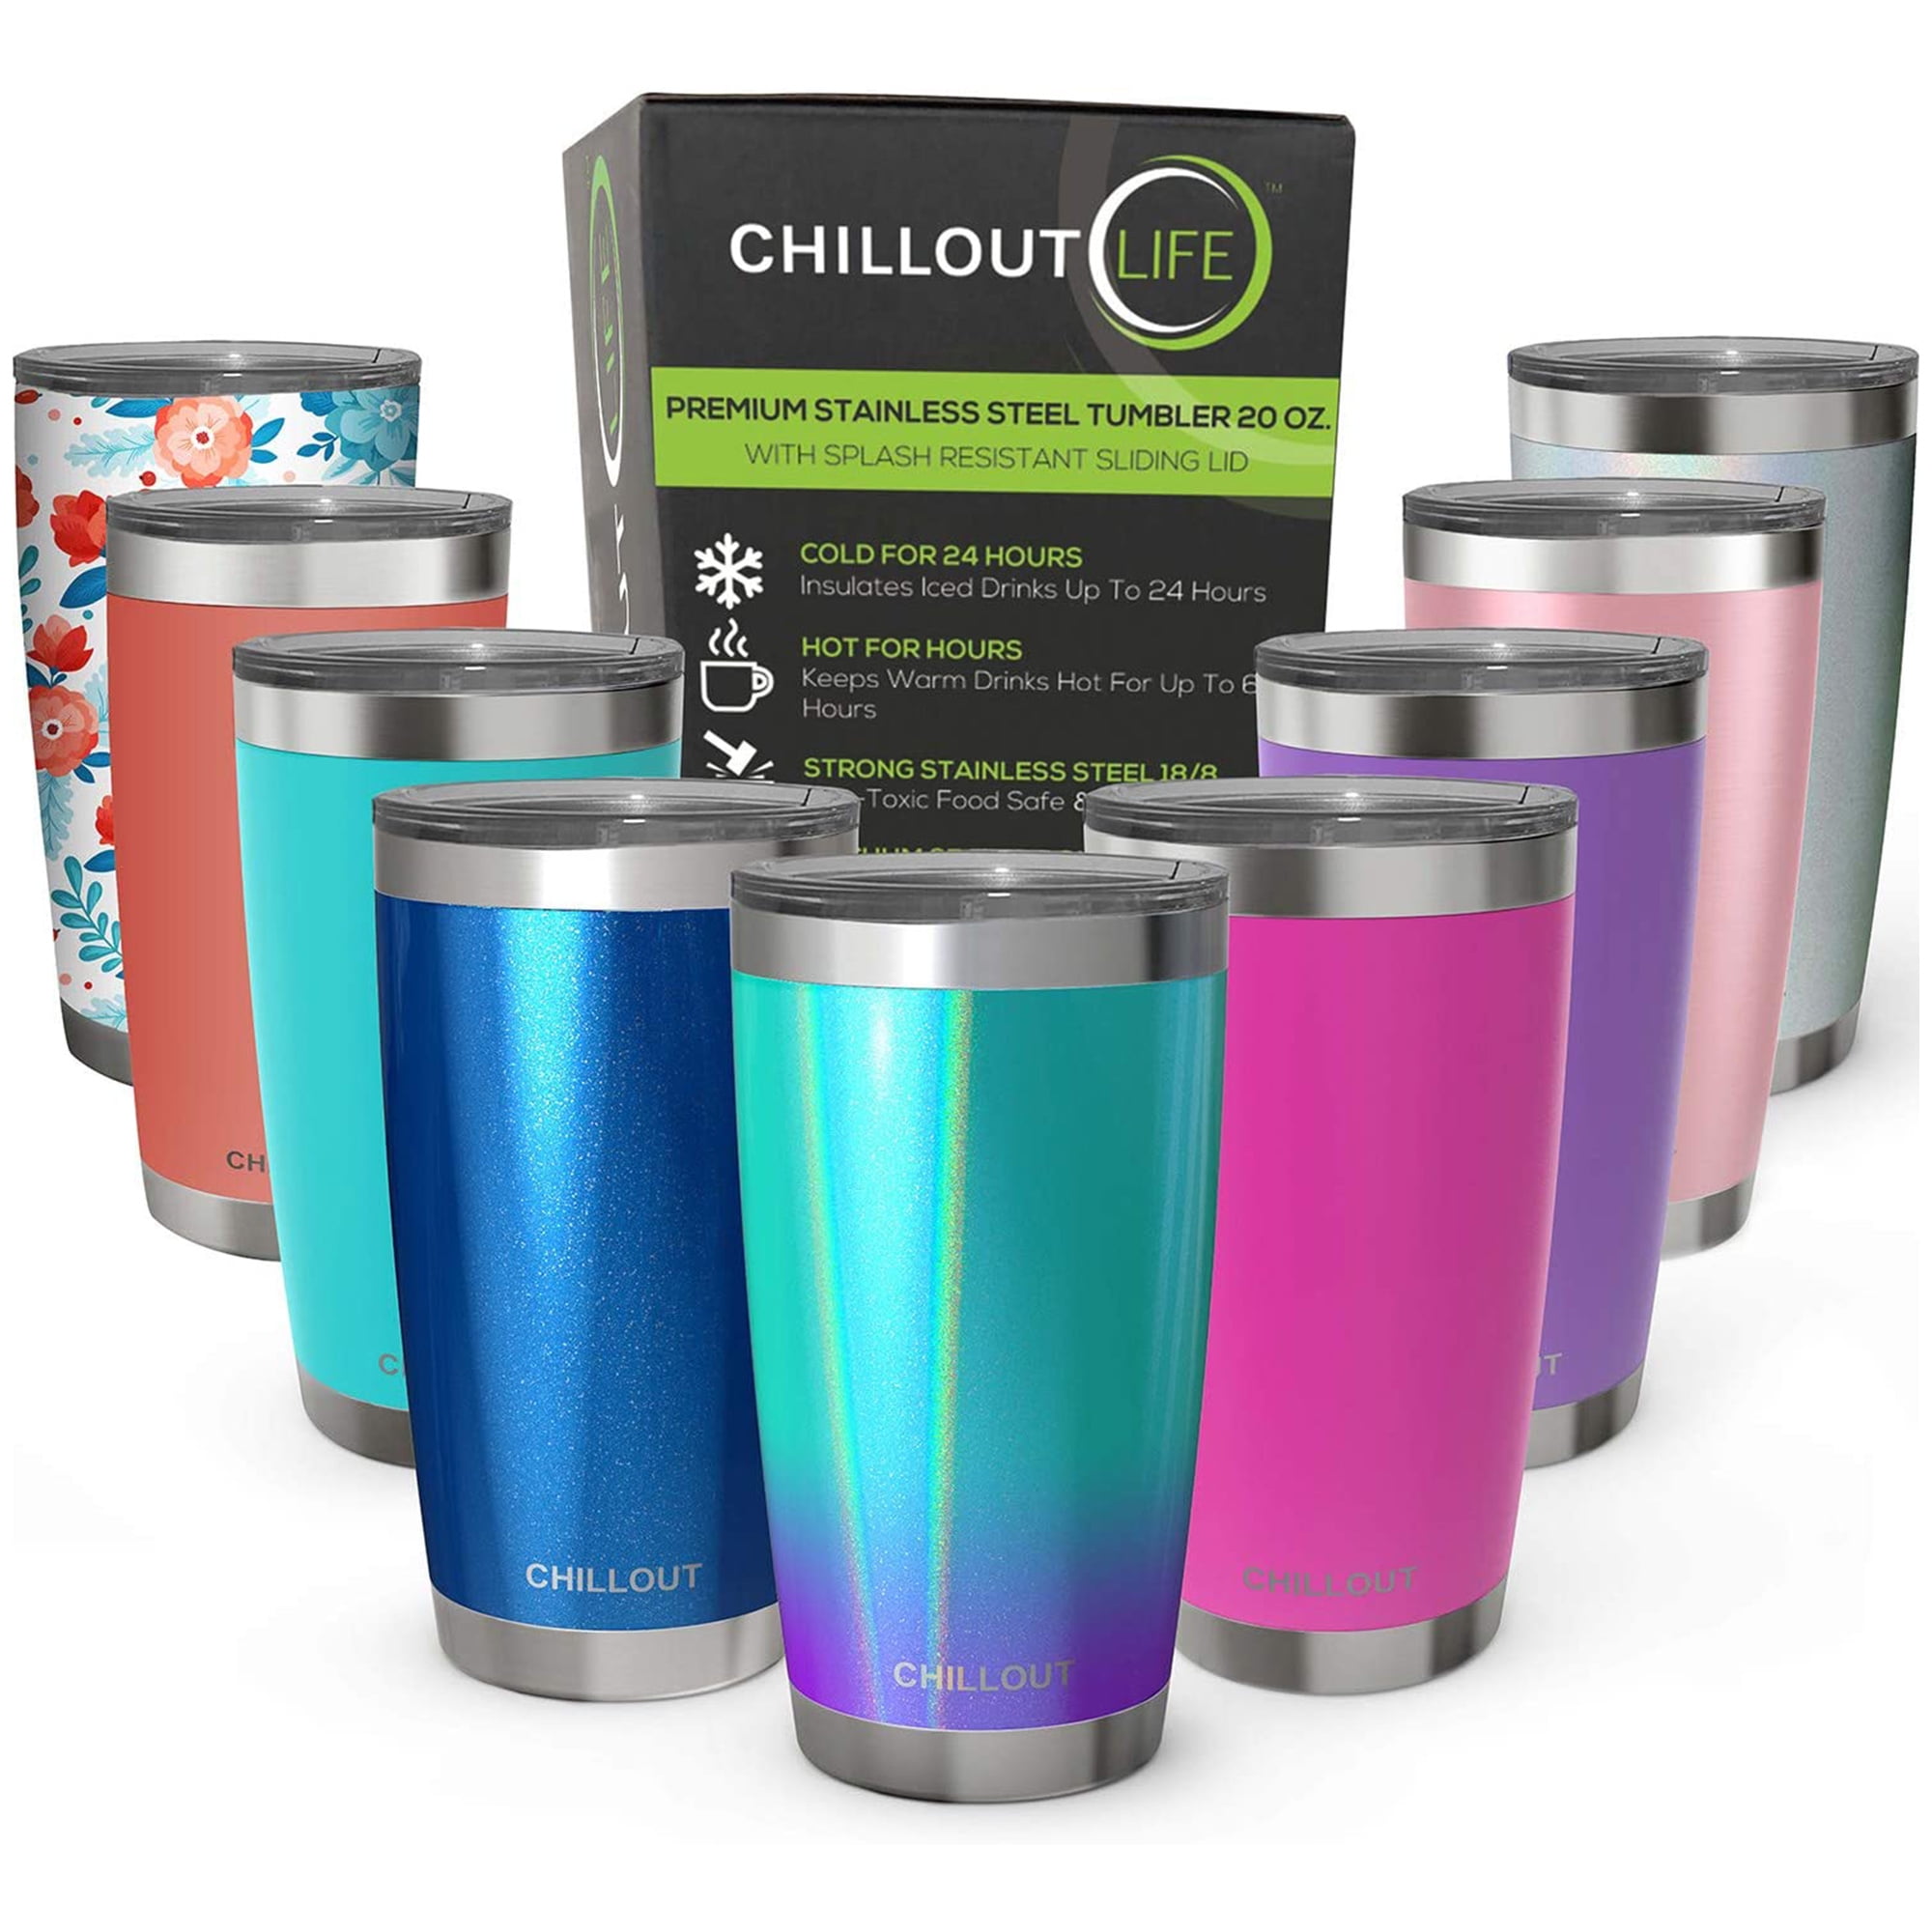 CHILLOUT LIFE 20 oz Stainless Steel Tumbler with Lid & Gift Box Mermaid Sparkle Double Wall Vacuum Insulated Large Travel Coffee Mug with Splash Proof Lid for Hot & Cold Drinks